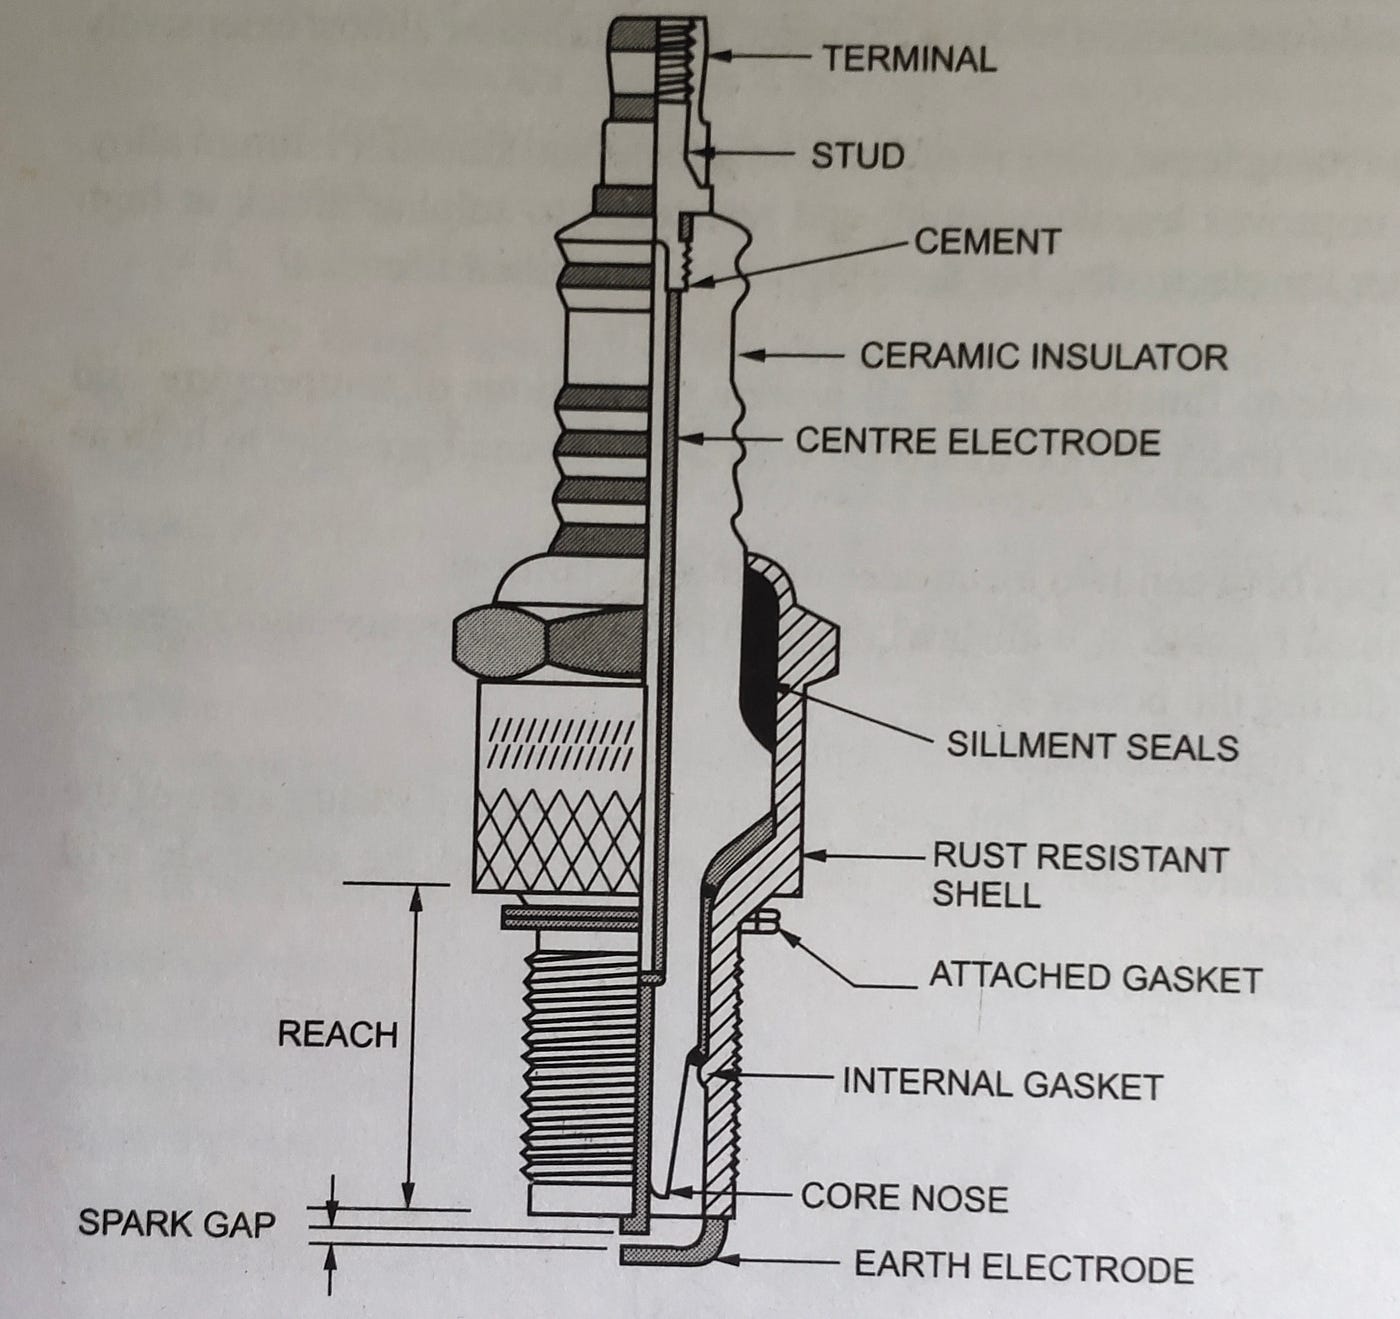 Spark Plug Diagram. The function of the spark plug is to…, by Technical  Education